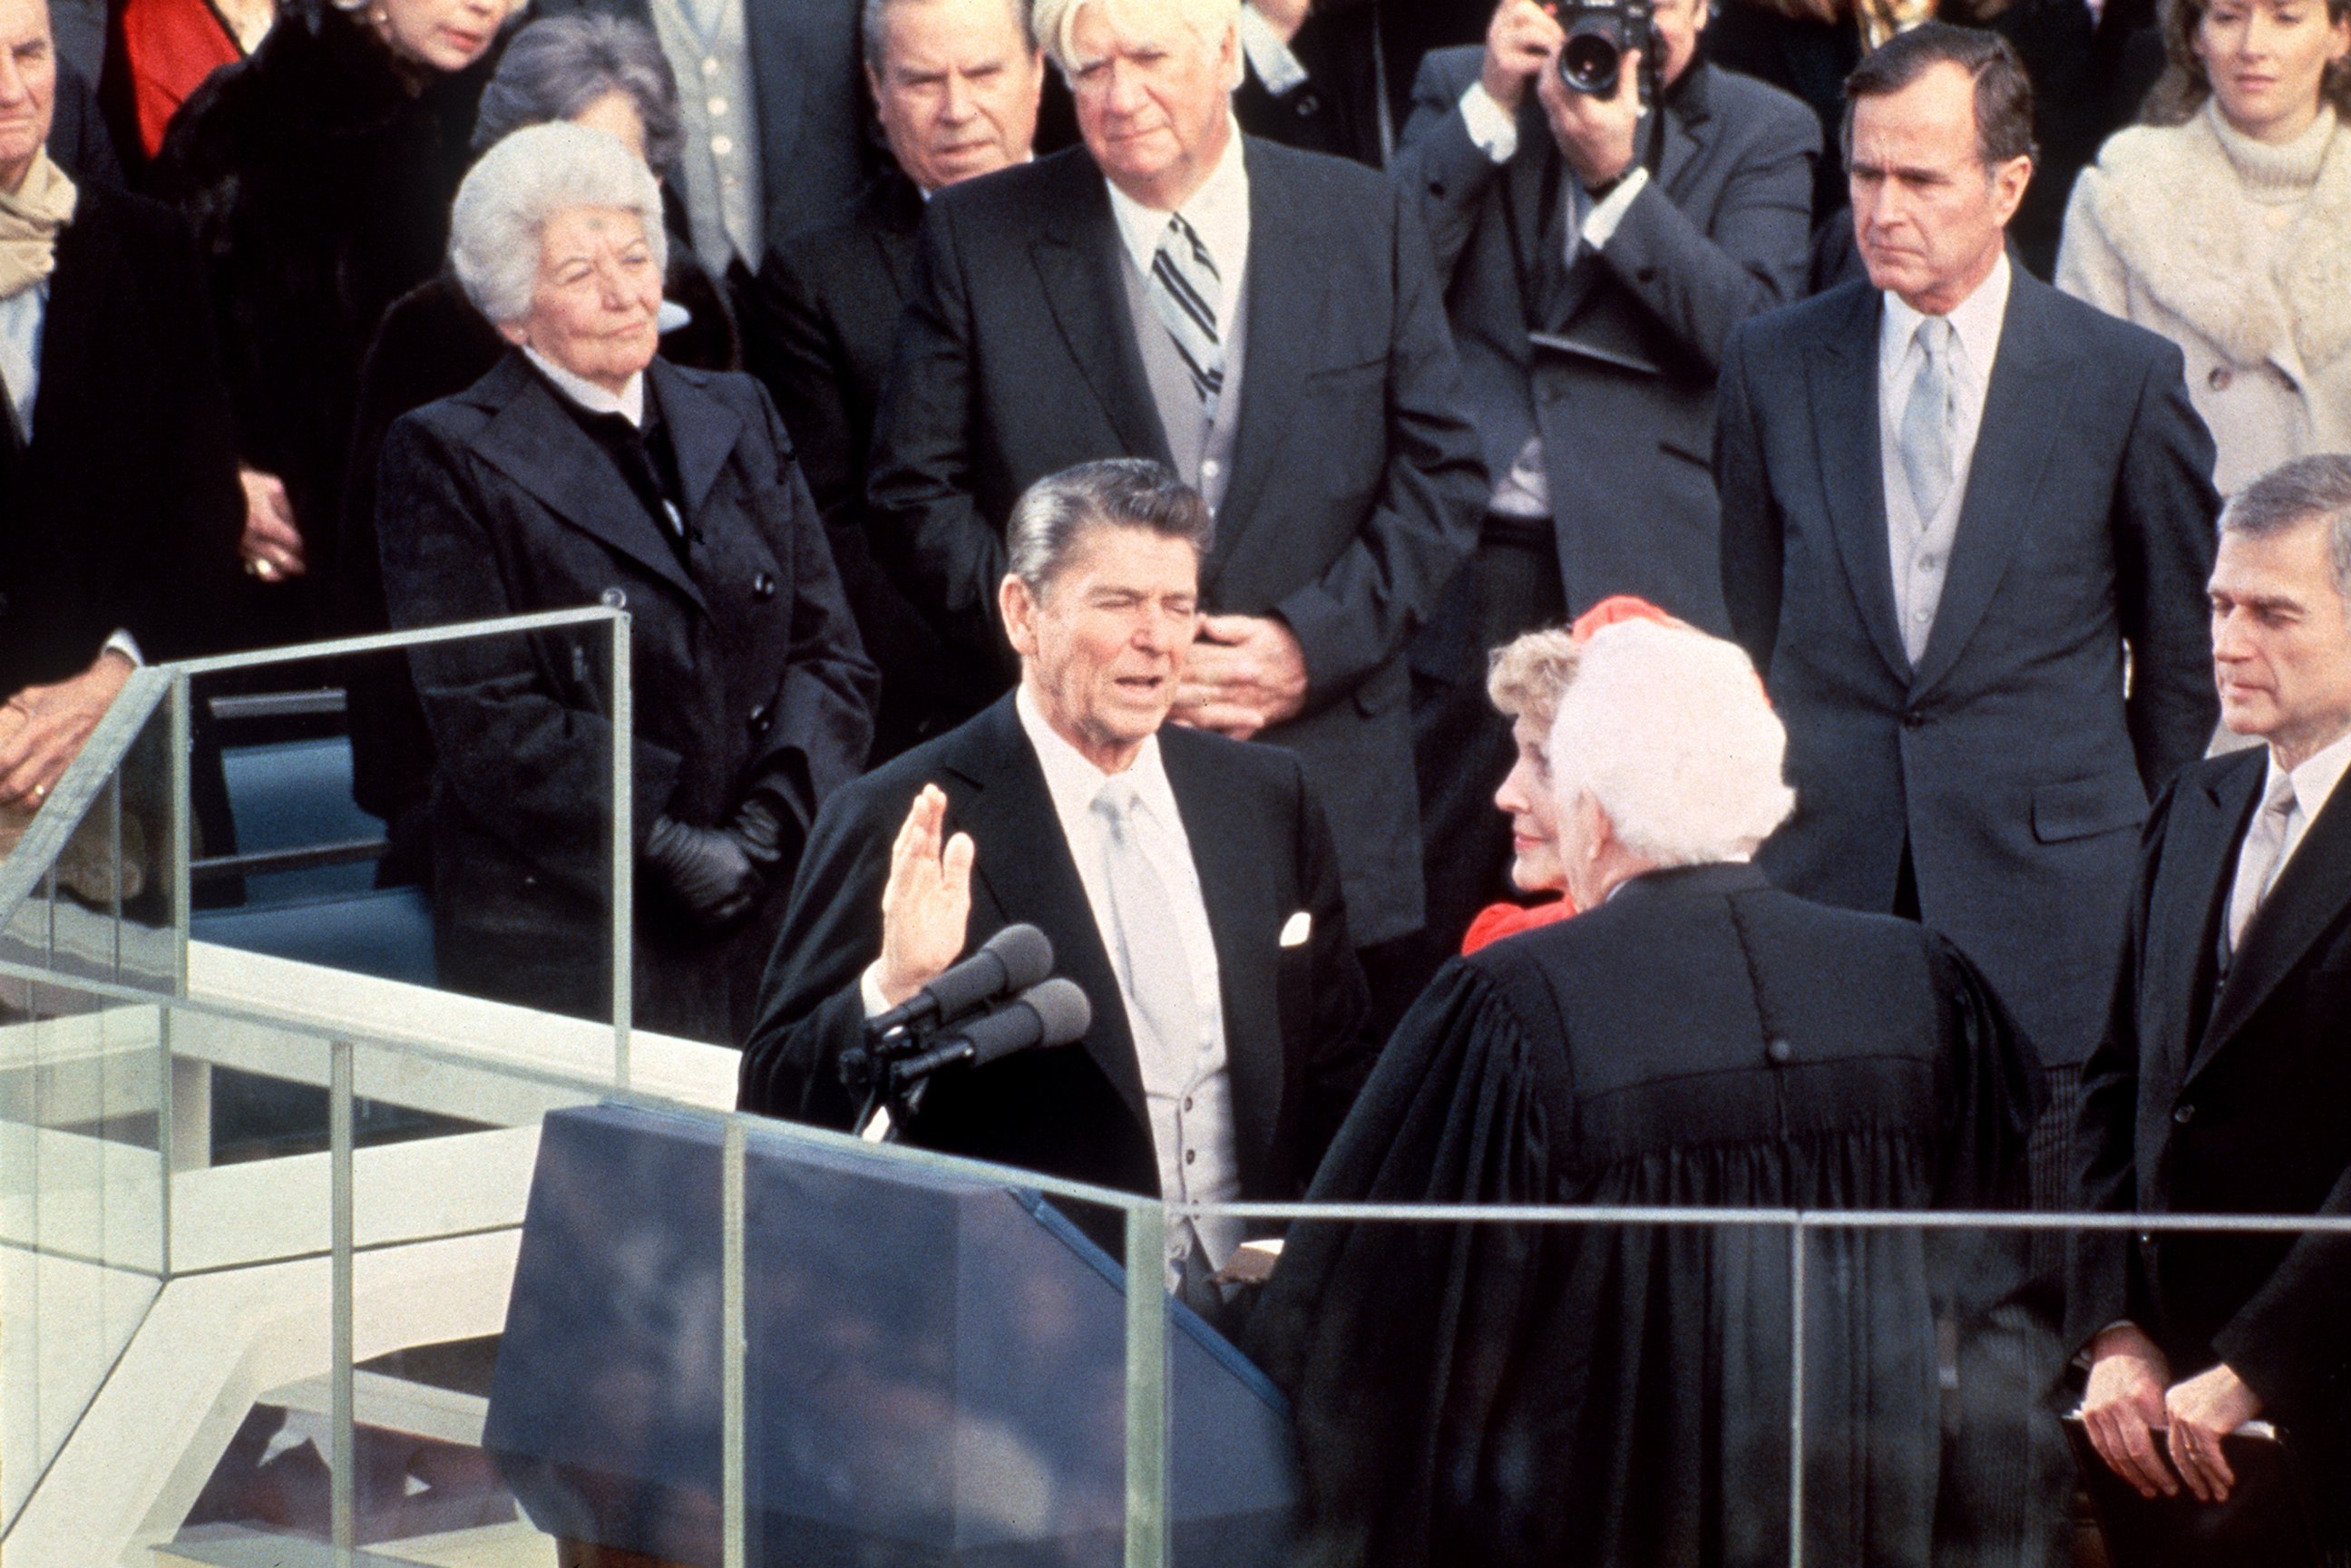 PHOTO: President Ronald Reagan is sworn in as 40th President of the United States by Chief Justice Warren Burger beside his wife Nancy Reagan during inauguration ceremony, on Jan. 20, 1981 at the Capitol in Washington, D.C.